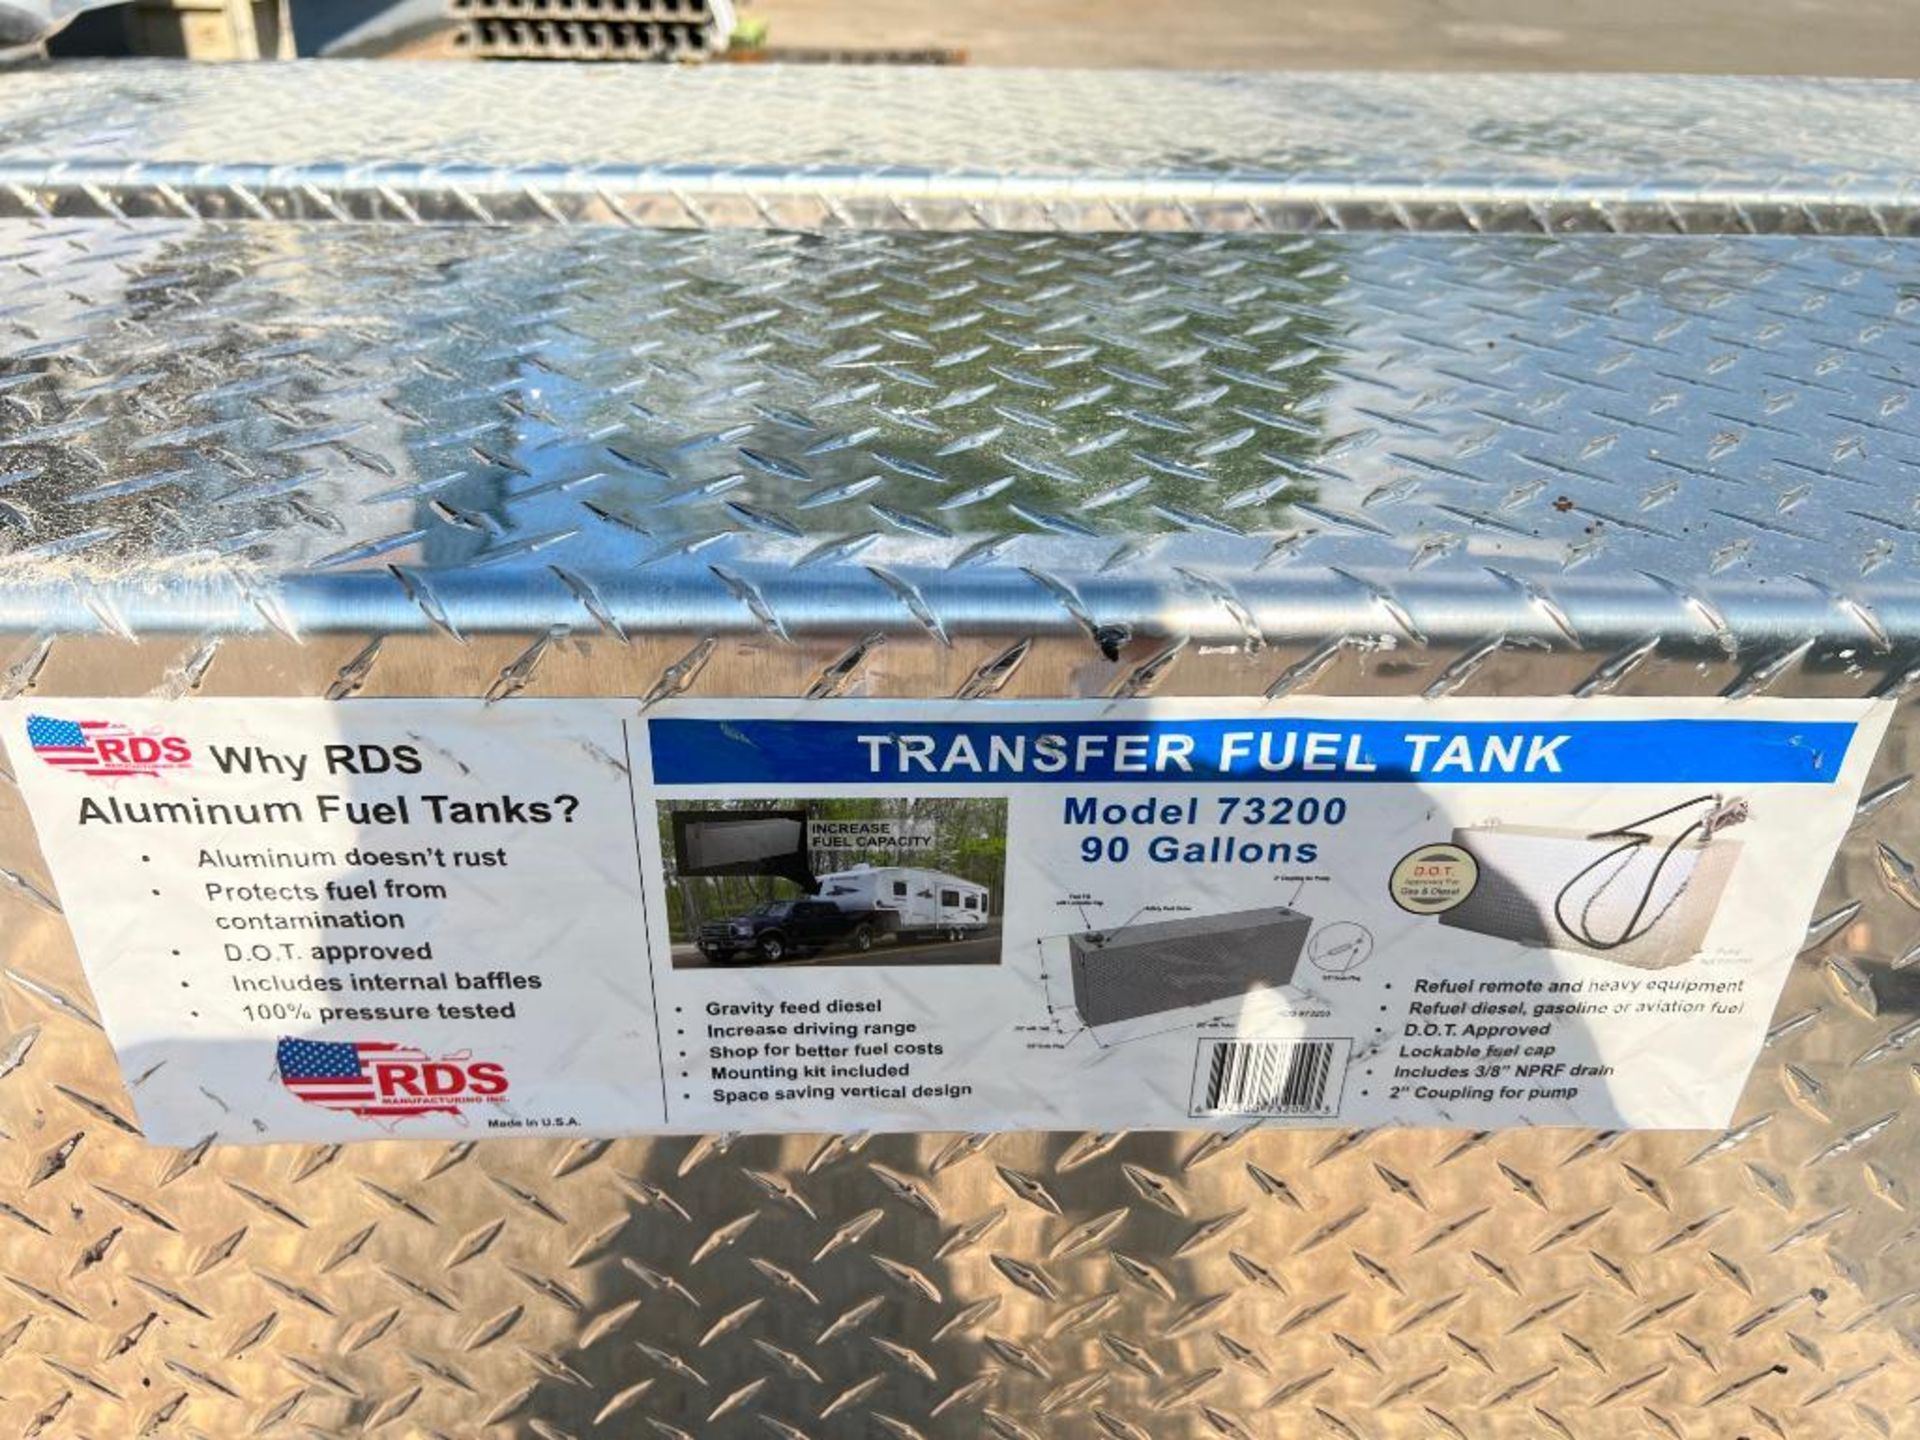 NEW RDS 90 Gallon Diesel Fuel Transfer Tank, Serial #31978. Located in Mt. Pleasant, IA - Image 5 of 5